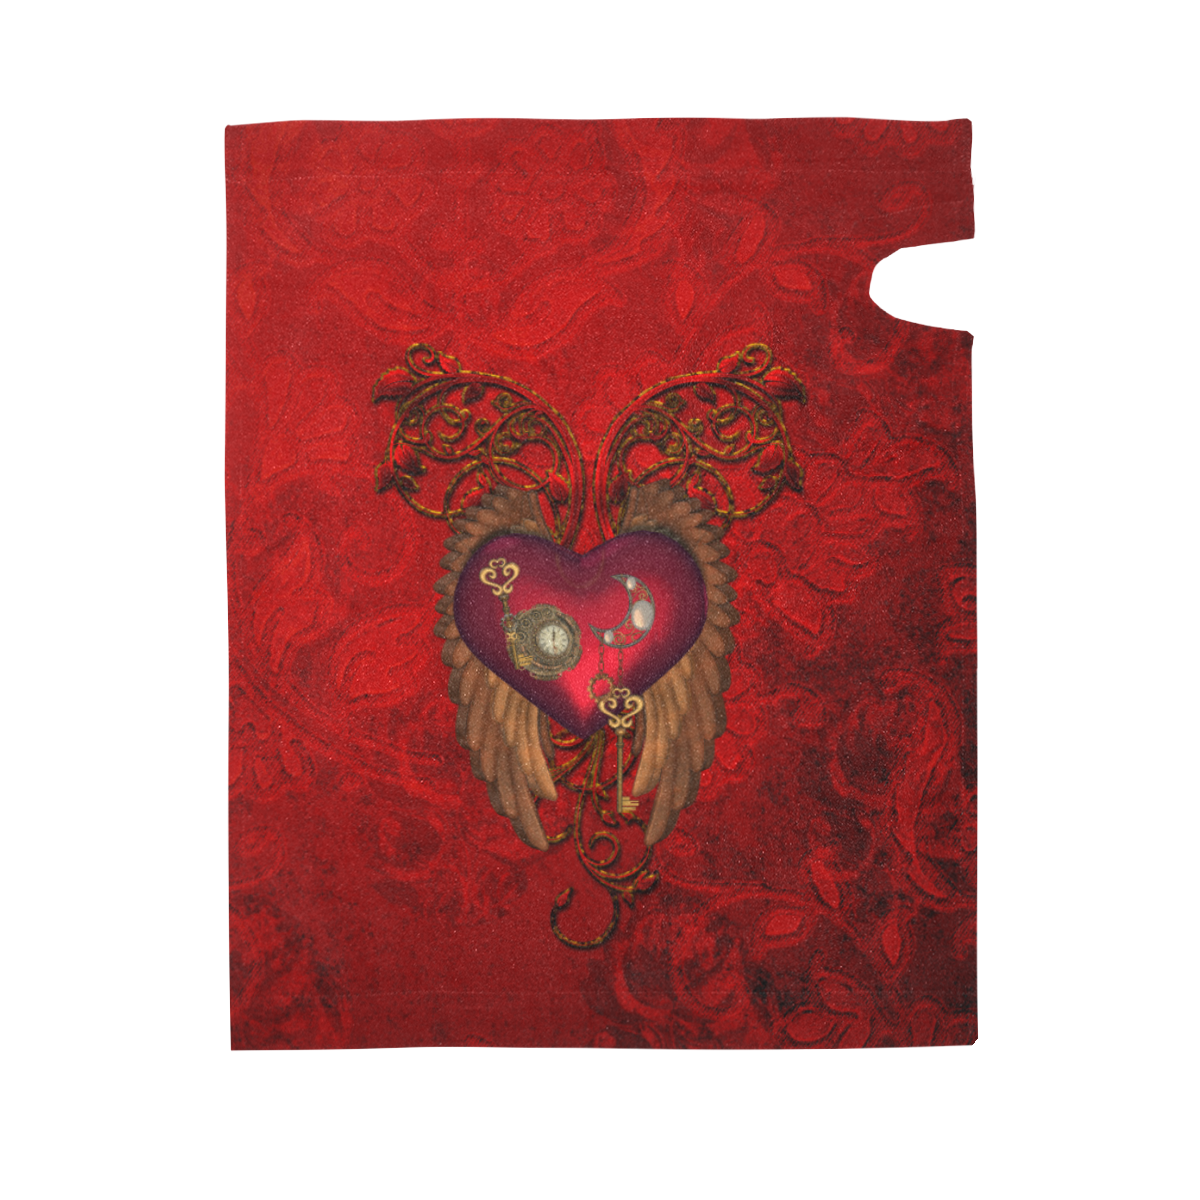 Beautiful heart, wings, clocks and gears Mailbox Cover